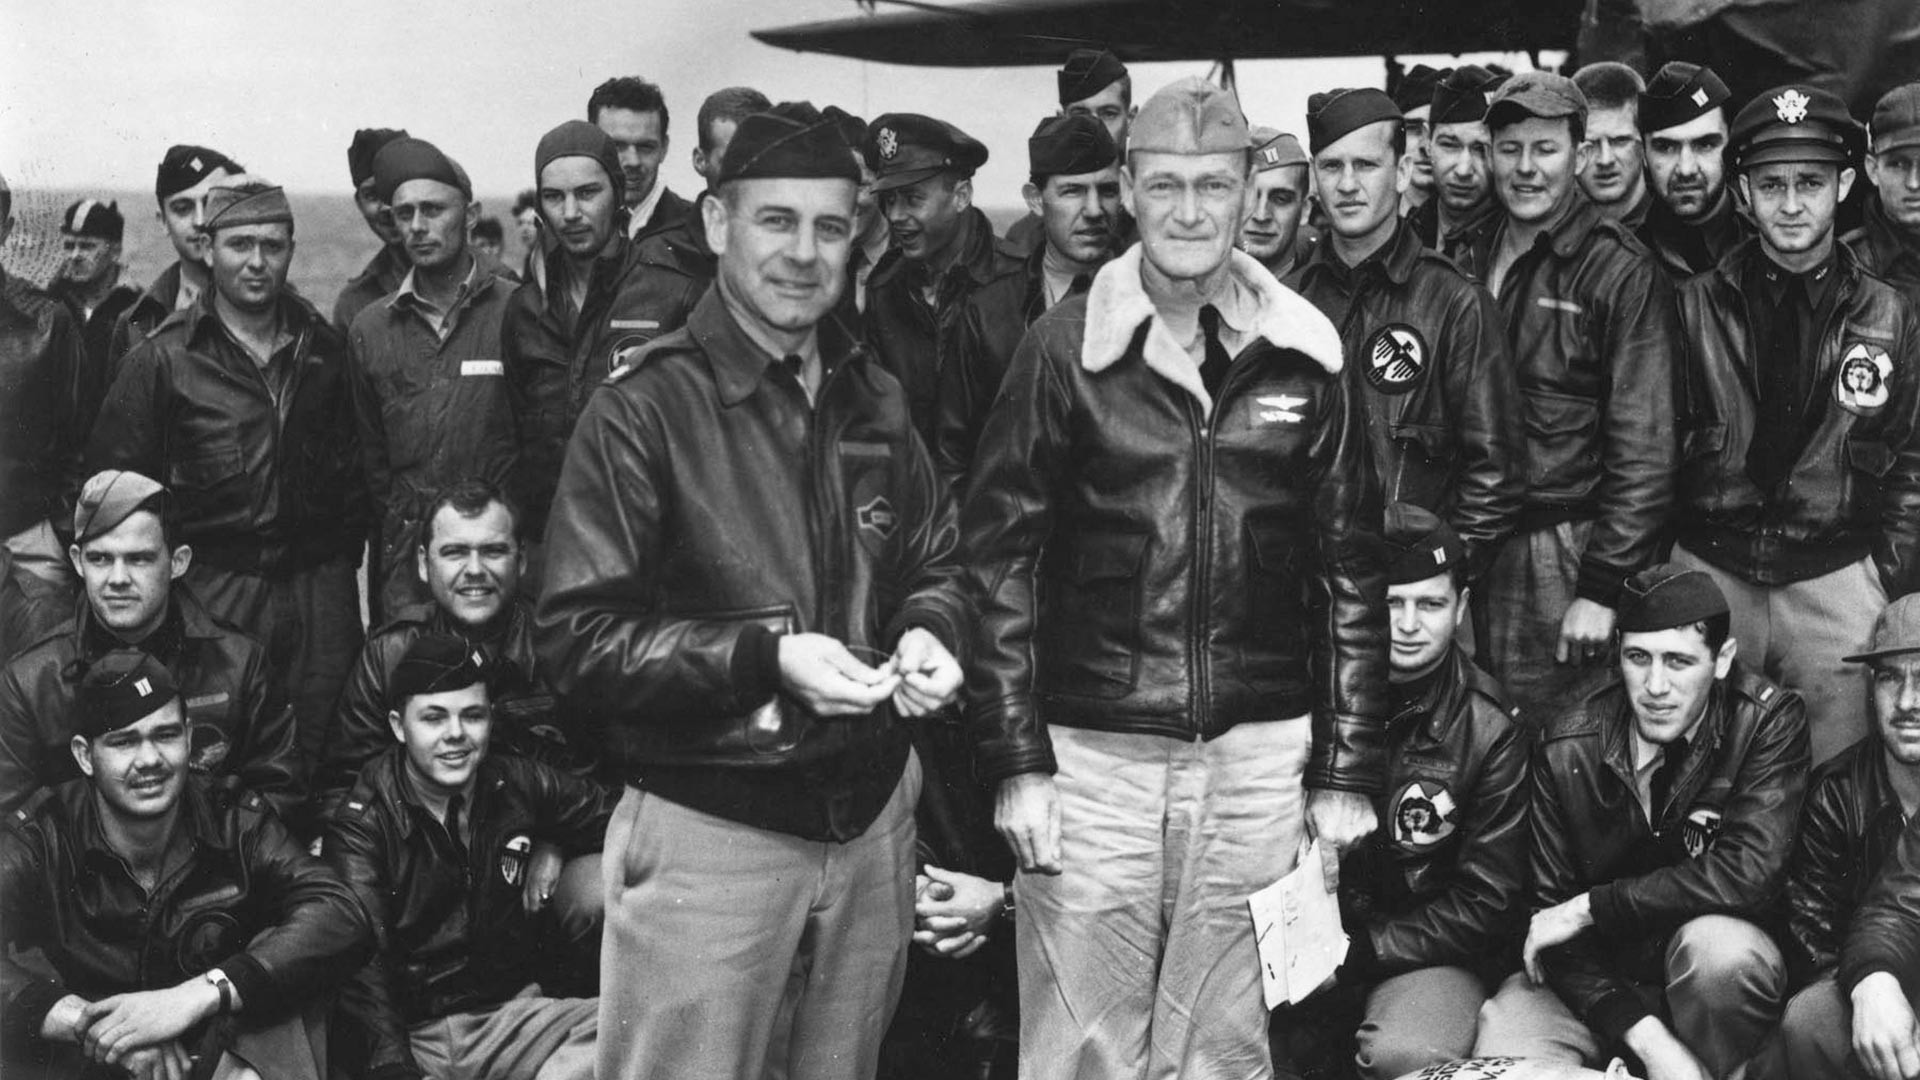 Lieutenant Colonel James H. Doolittle (left front) poses with USAAF aircrew members on Hornet's flight deck.